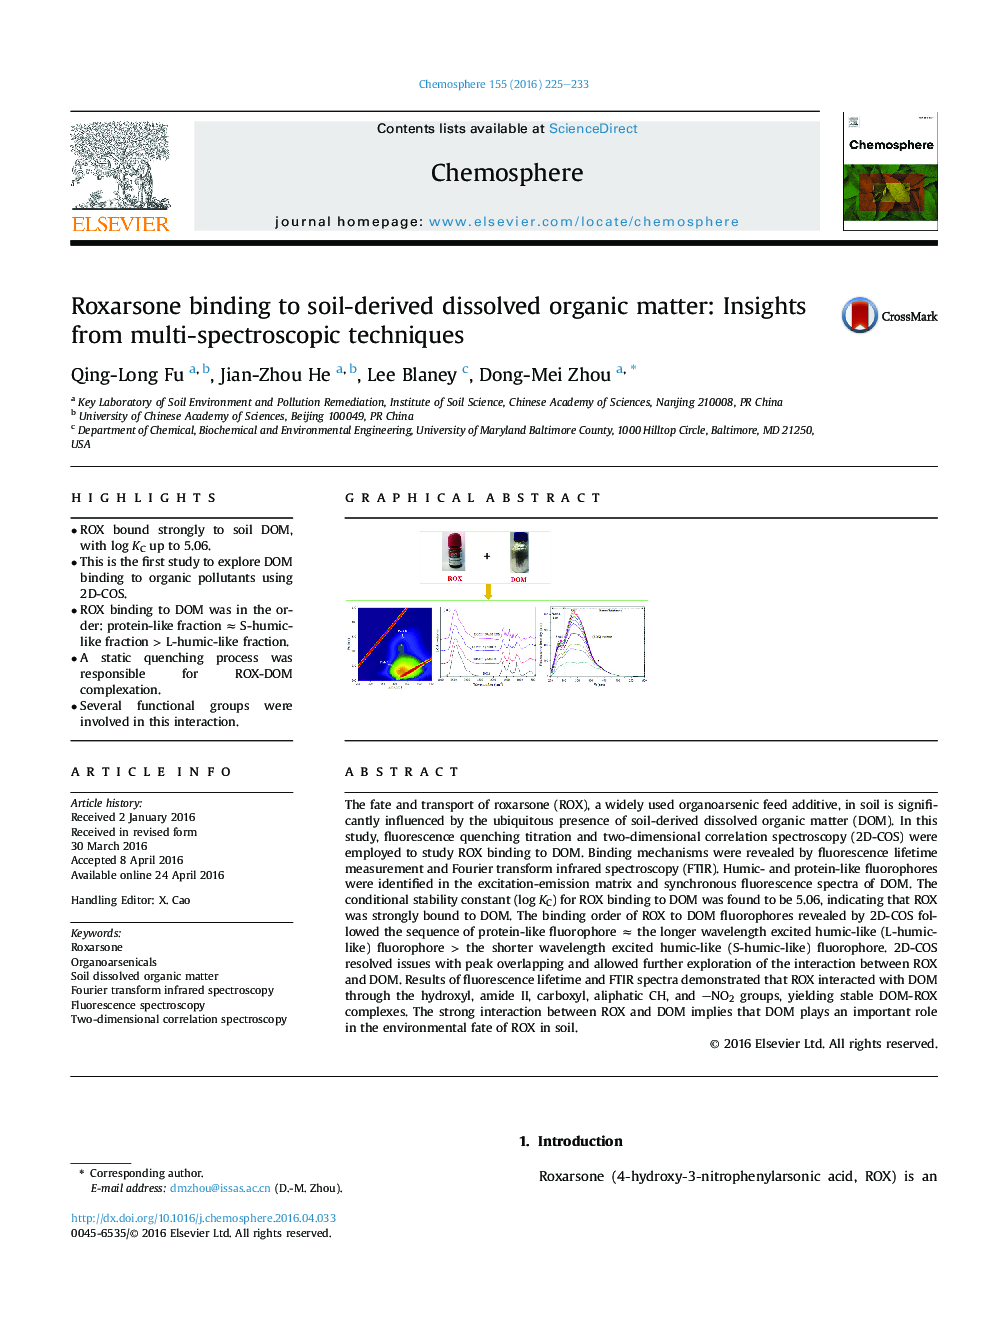 Roxarsone binding to soil-derived dissolved organic matter: Insights from multi-spectroscopic techniques